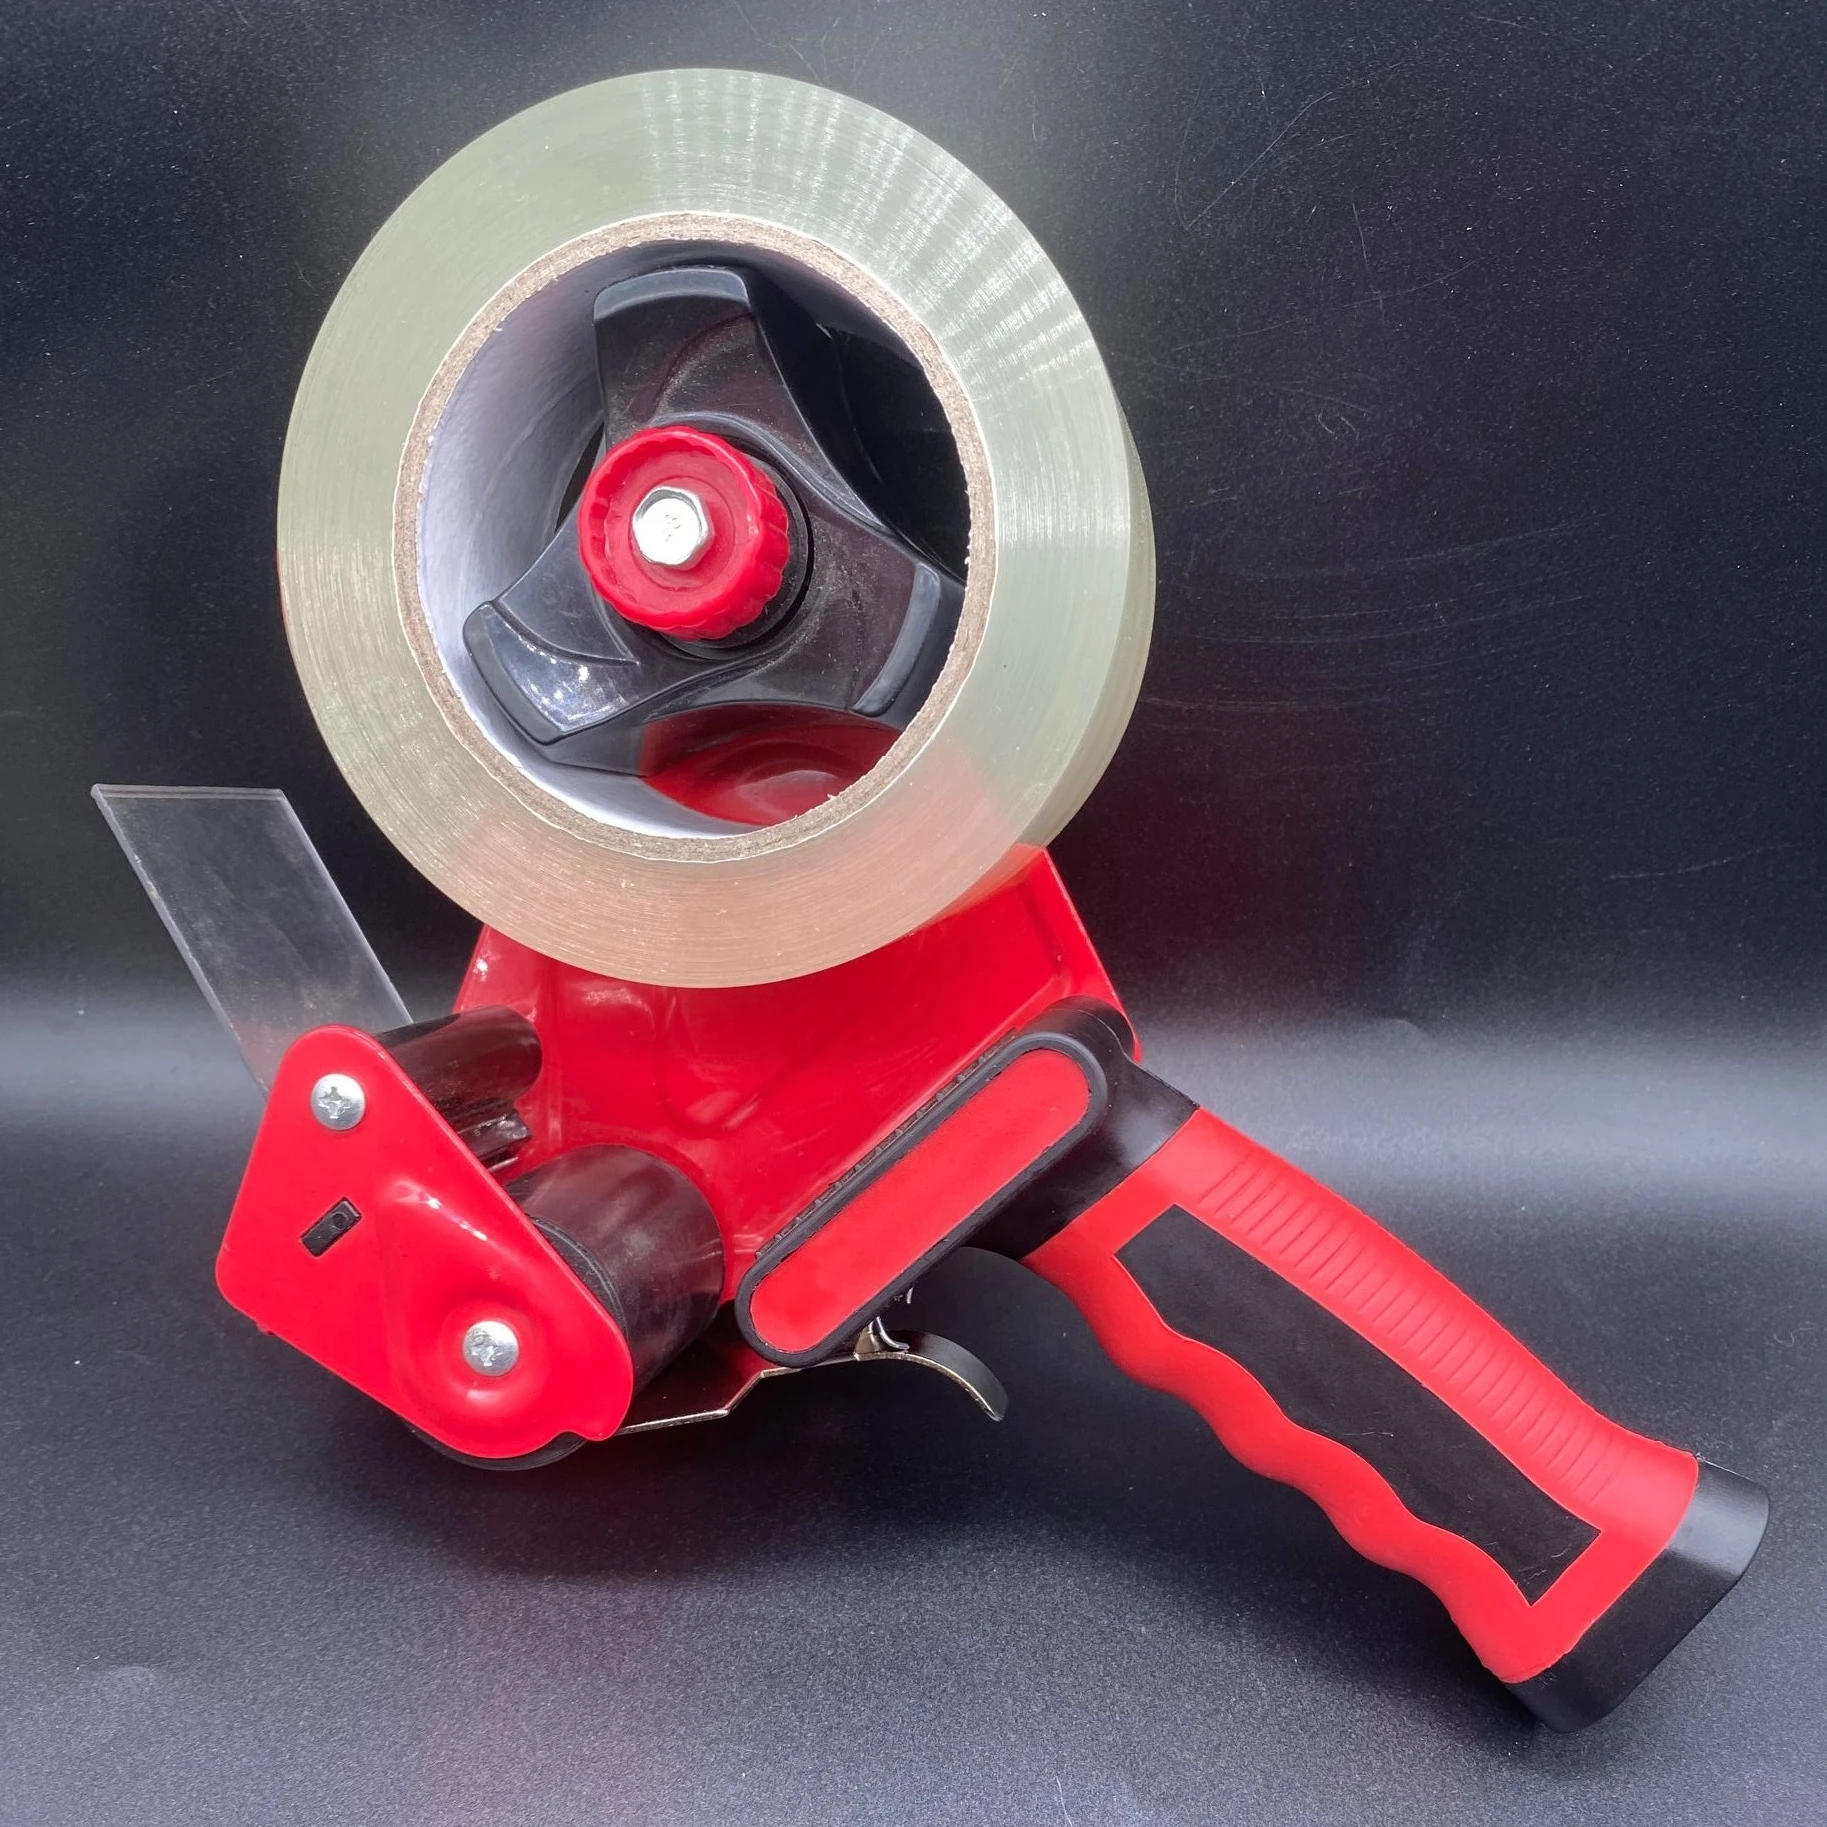 

Red black color 2 inch duty heavy industrial packing tape dispenser gun with hook non slip rubber handle 1roll clear tape